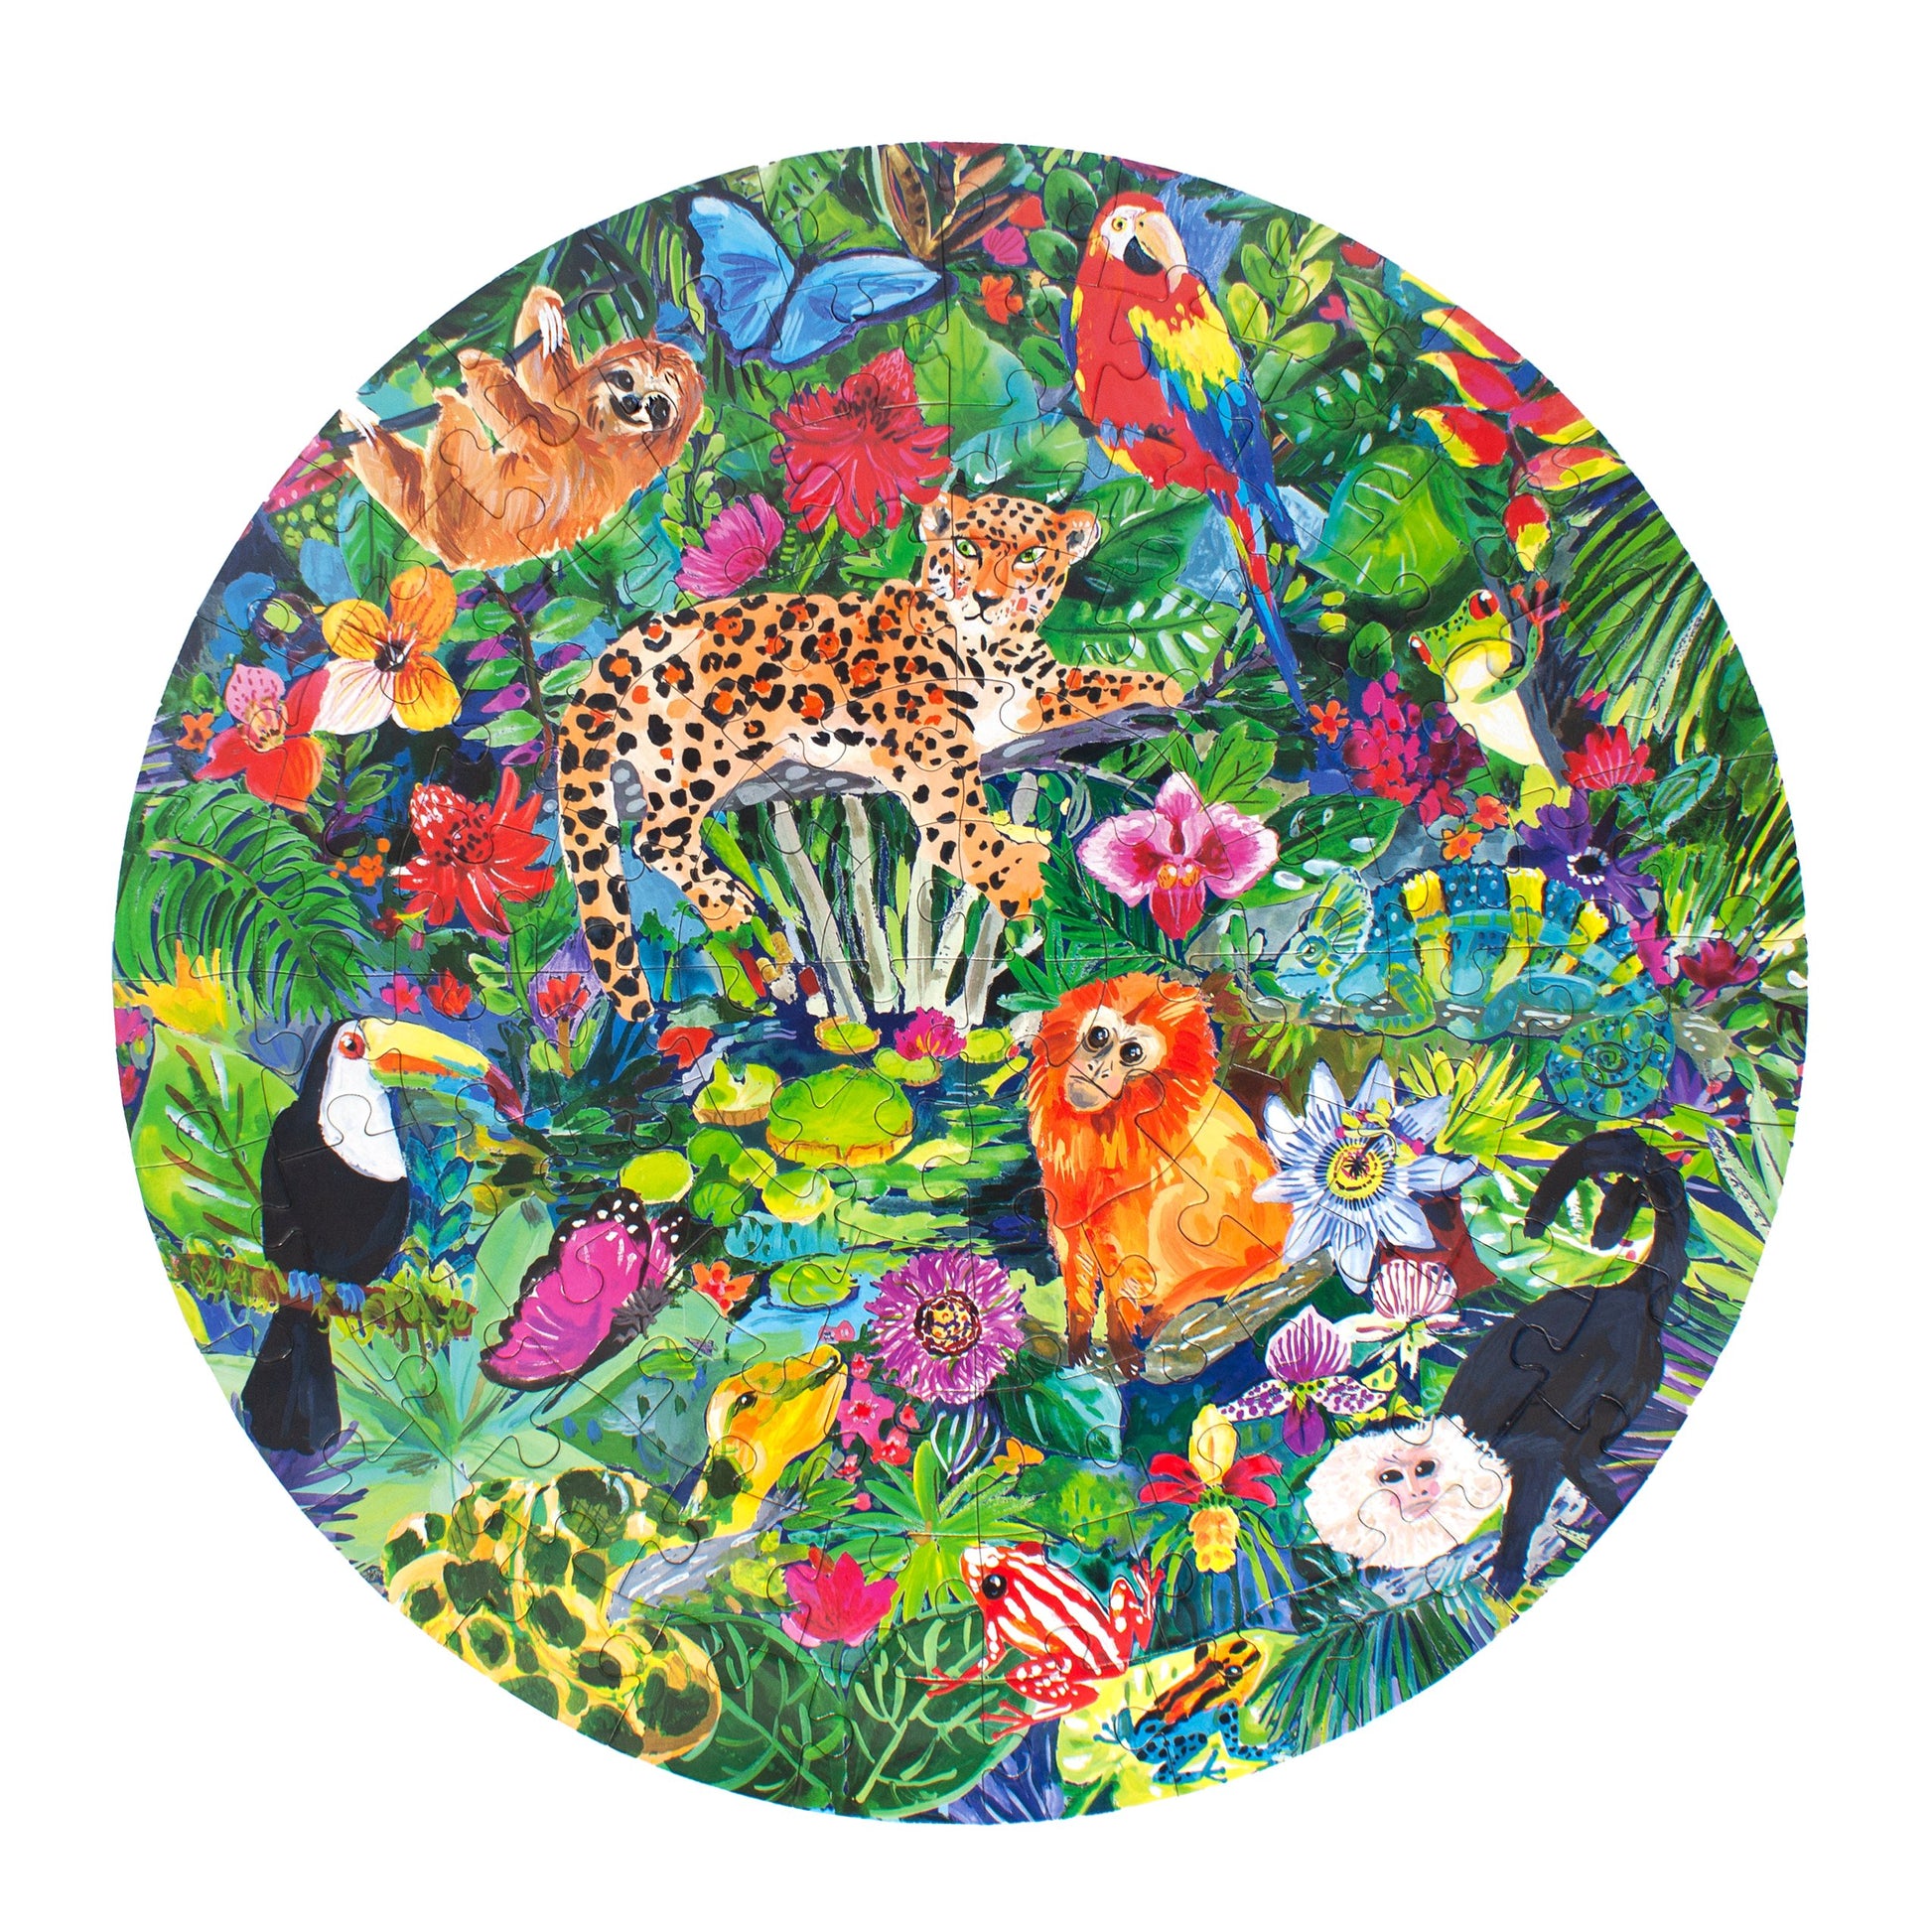 eeBoo100pc Puzzle Rainforest Round The Toy Wagon